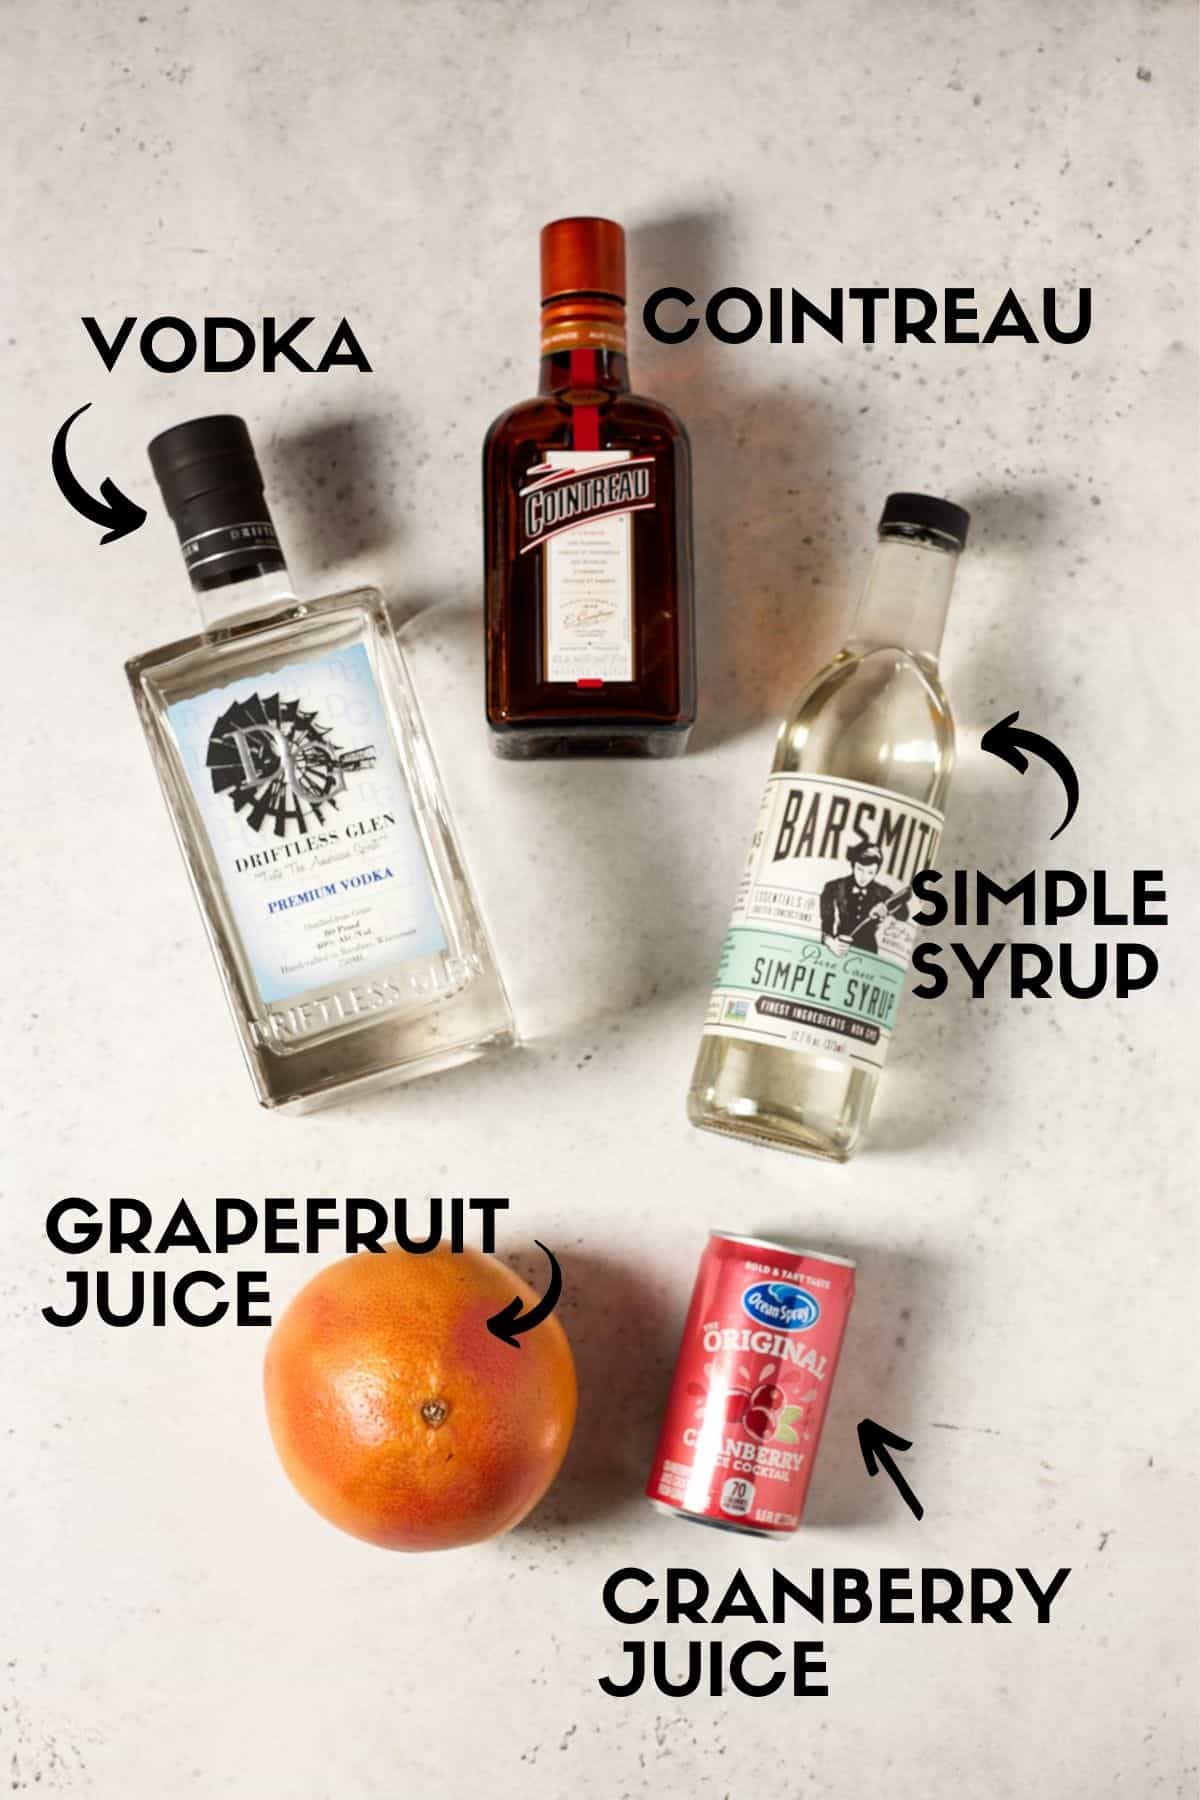 Bottles of vodka, cointreau, simple syrup, cranberry juice and a grapefruit. 